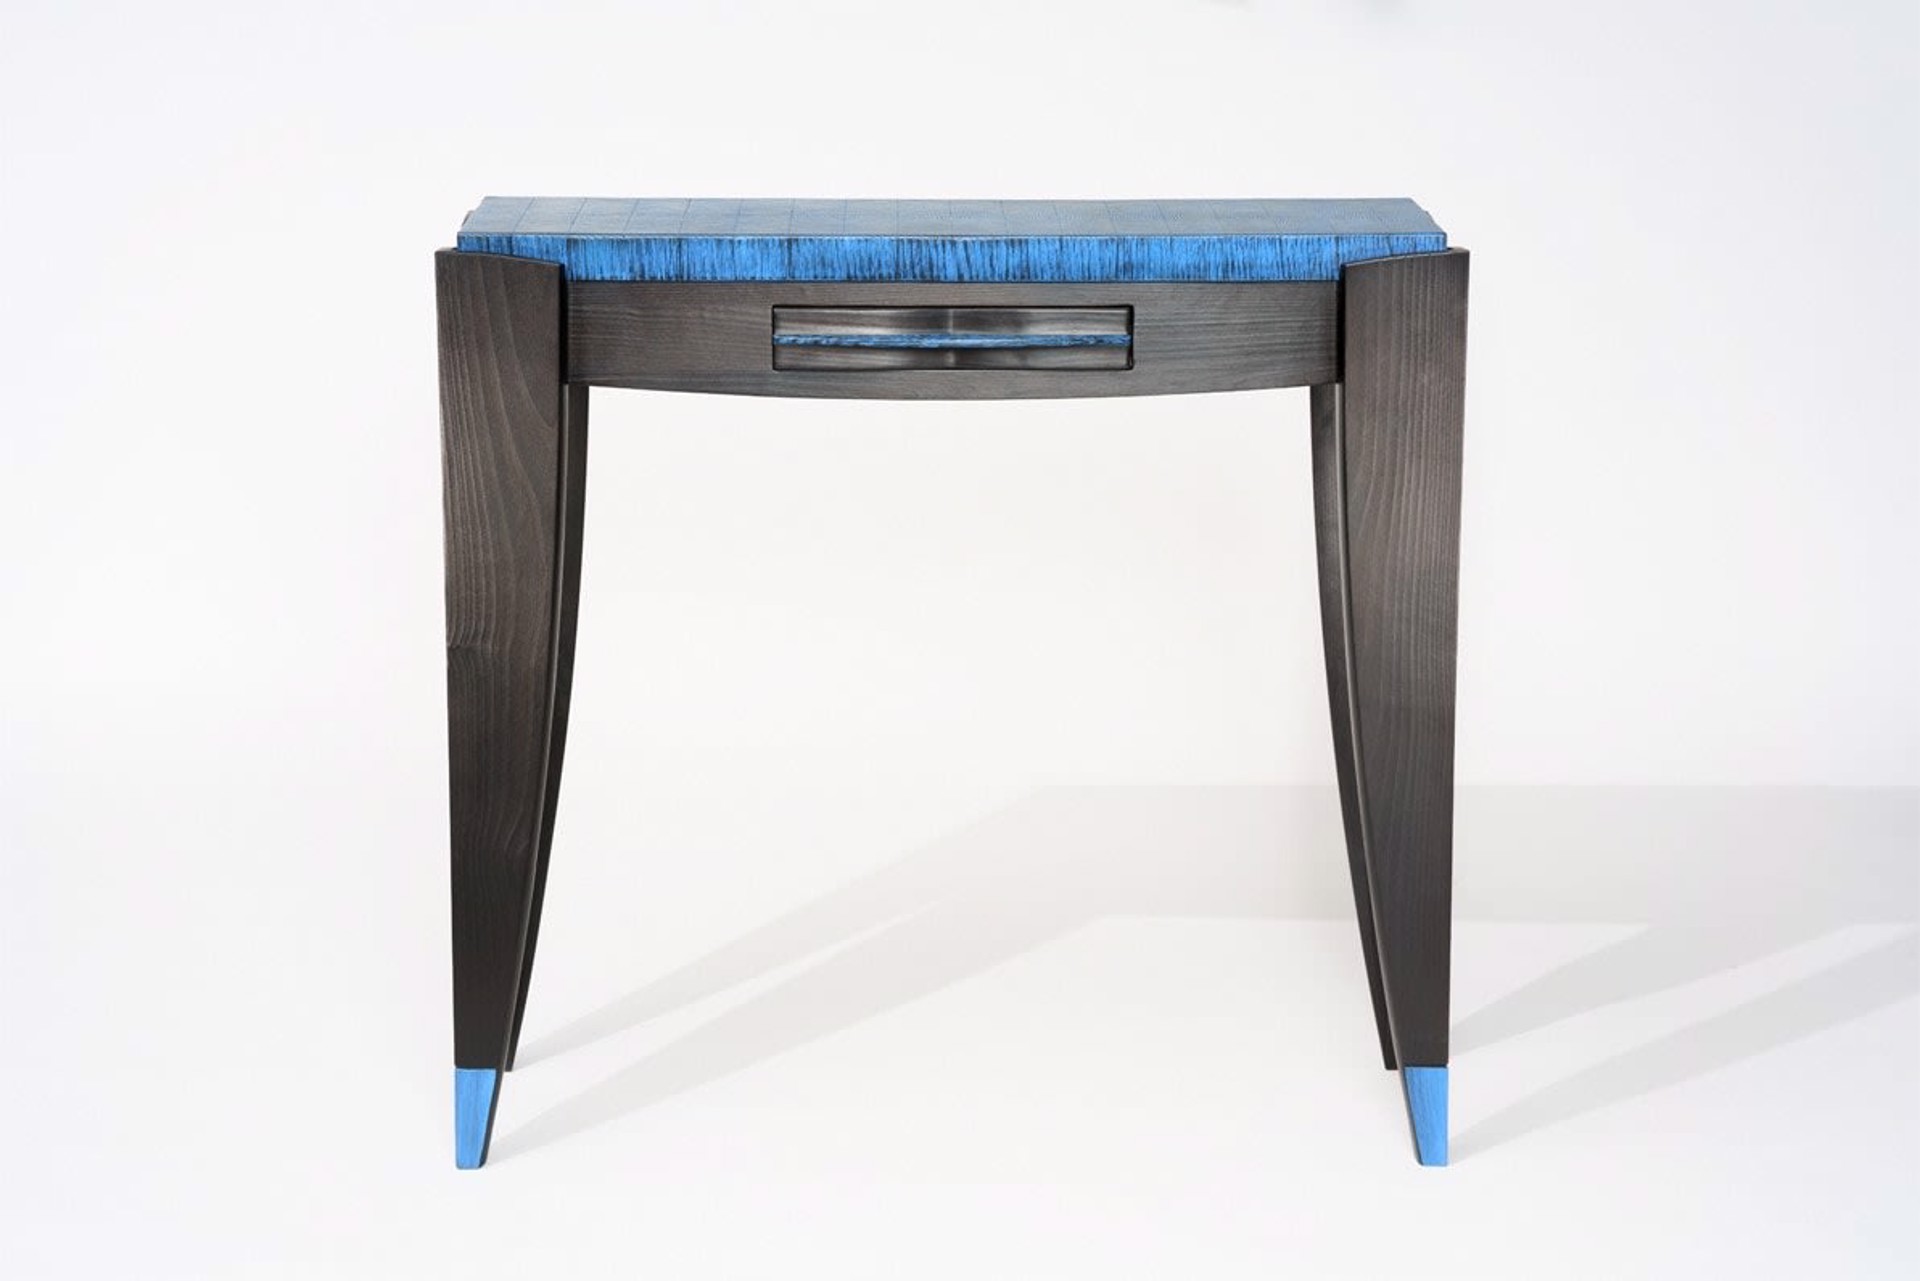 BLUE VIGNETTE CONSOLE TABLE WITH DRAWER by Doug Jones